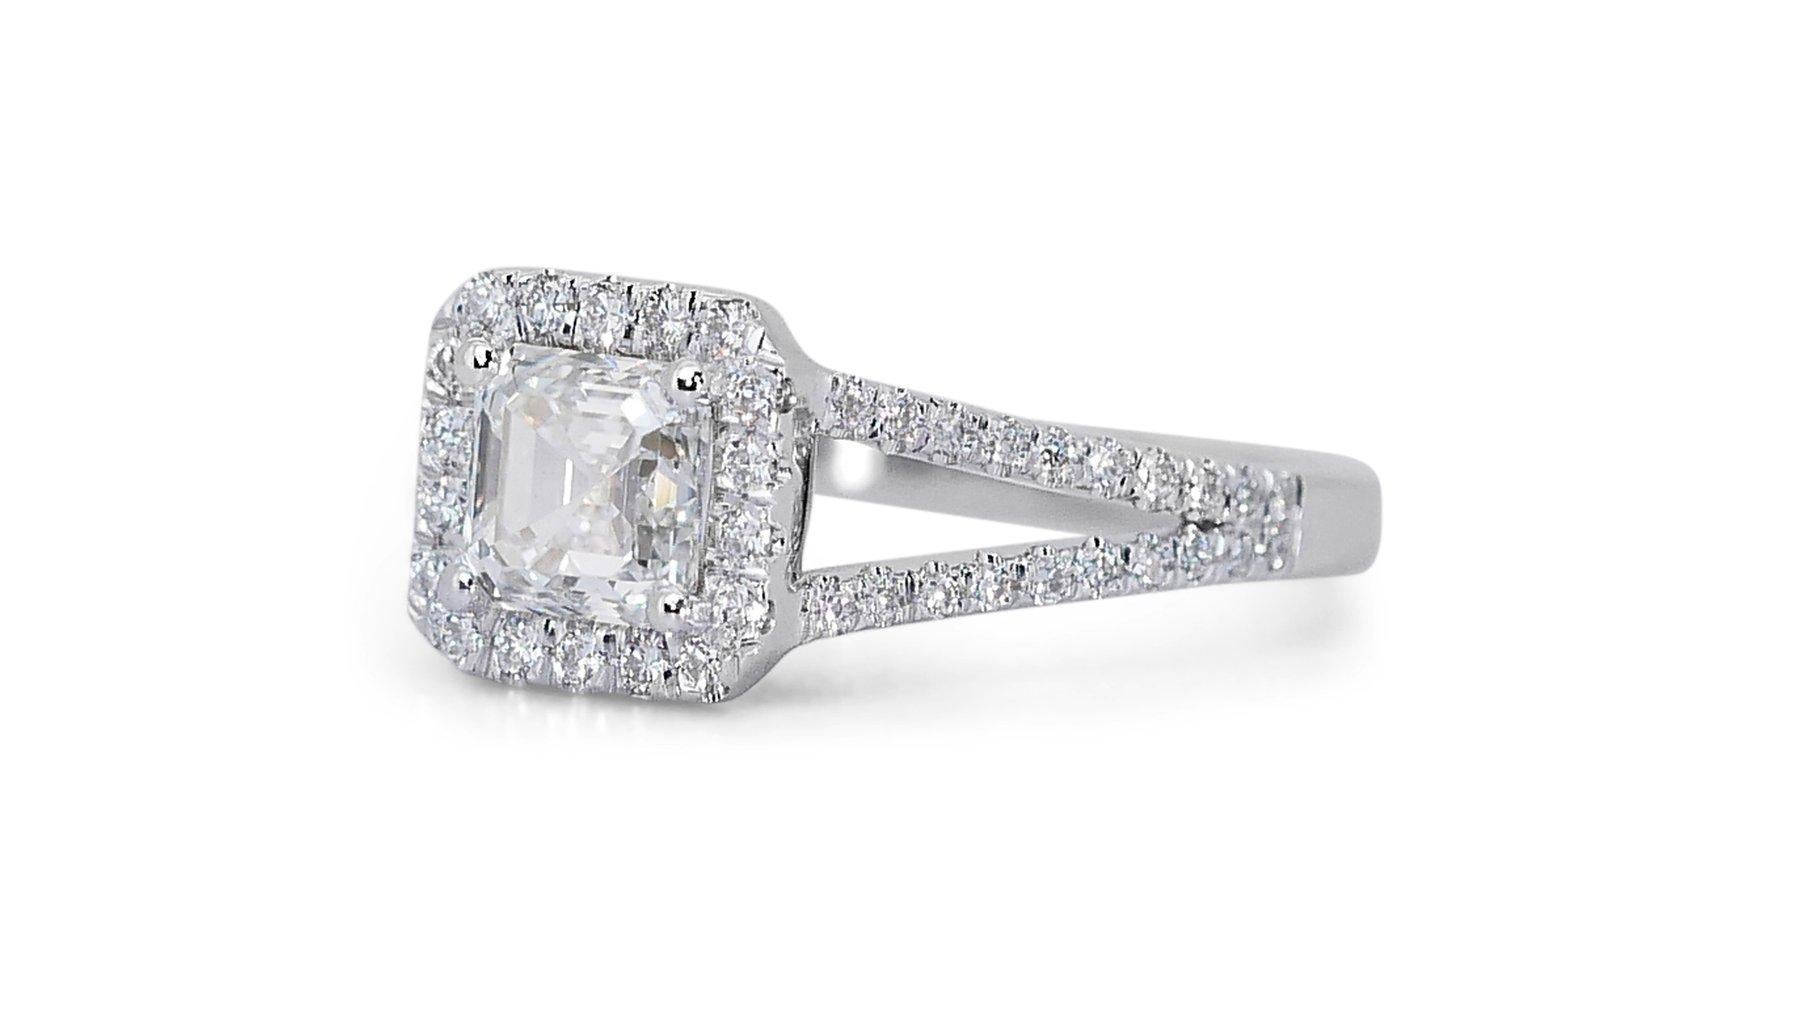 Emerald Cut Exquisite Ring with a Dazzling 1.01 carat Square Emerald Natural Diamond For Sale